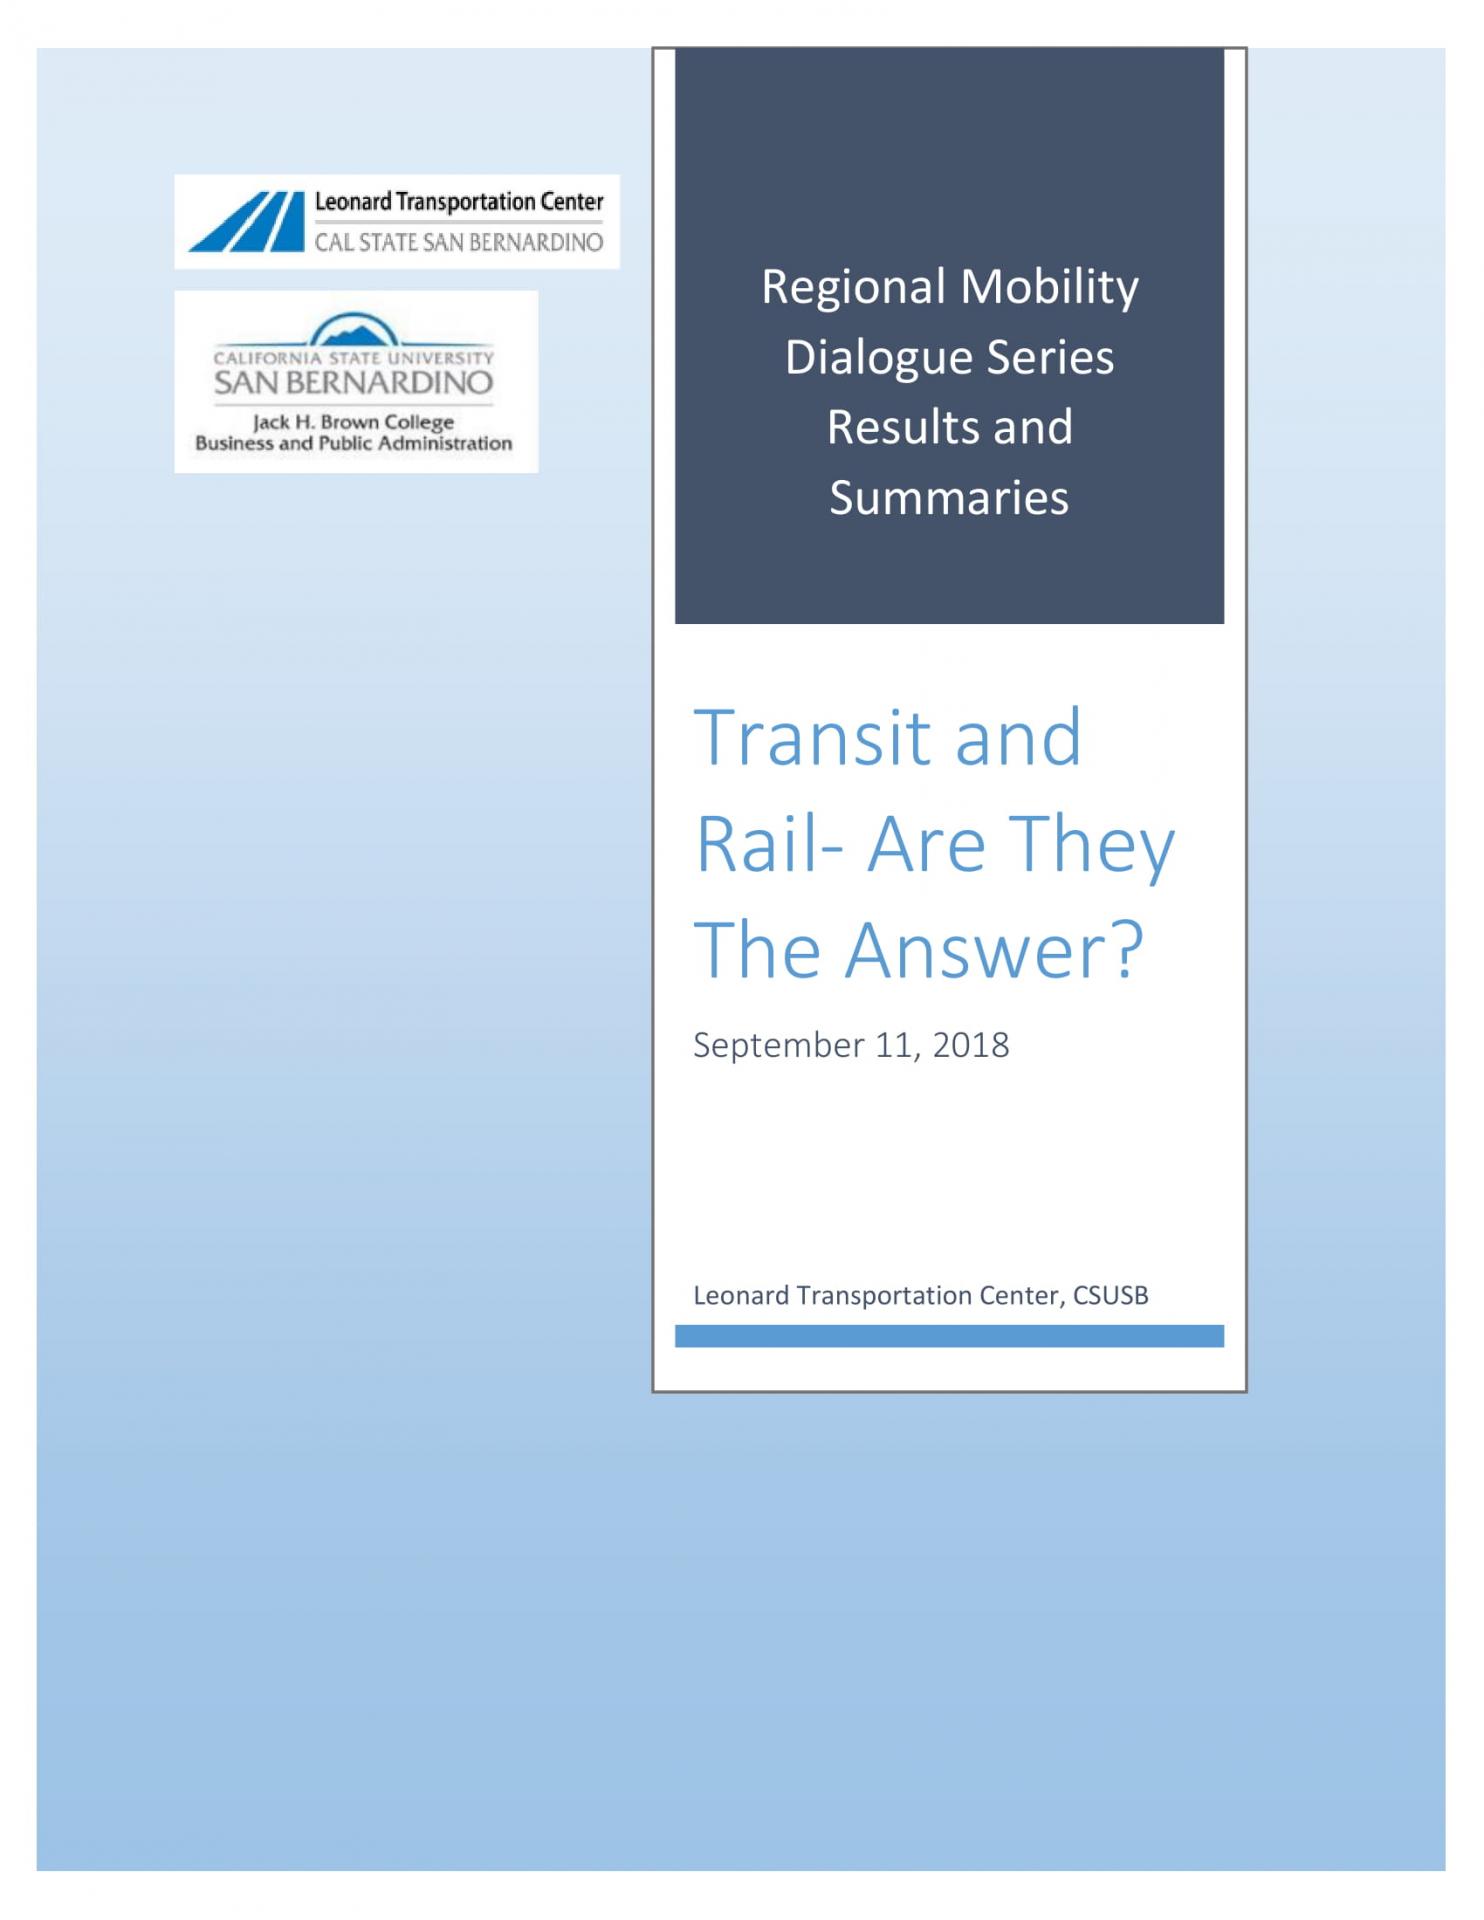 Transit and Rail- Are They The Answer? 